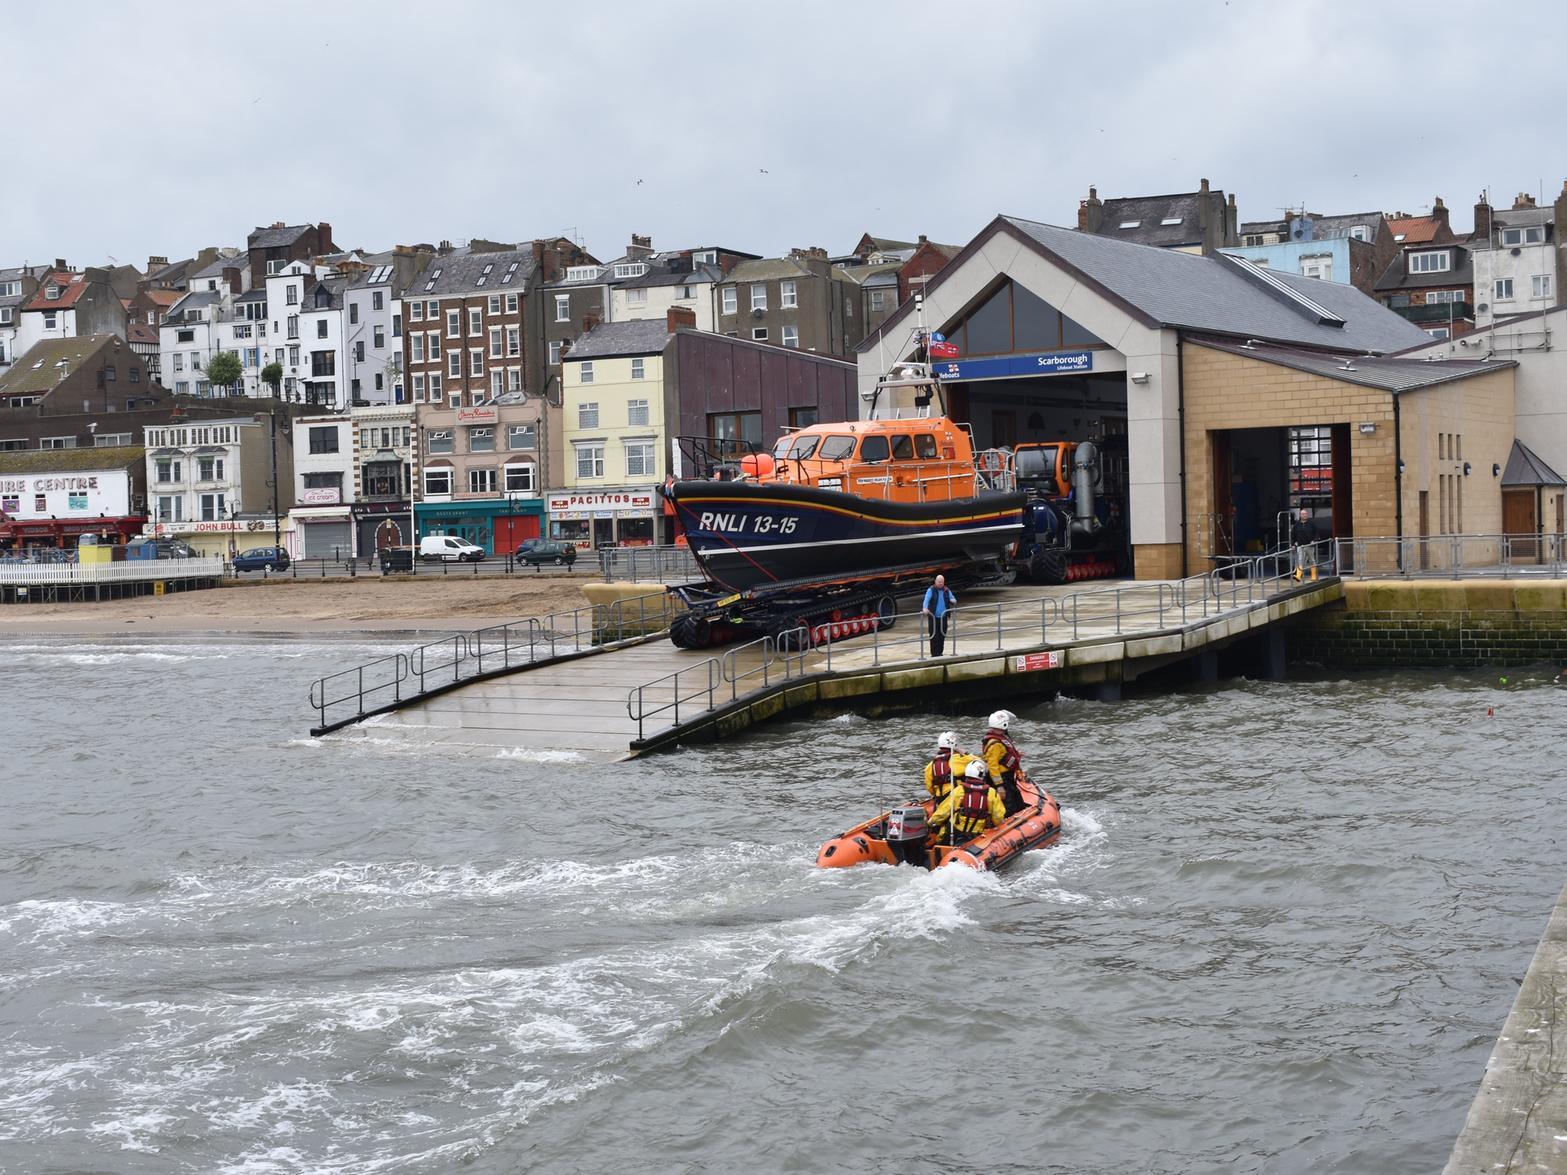 Scarborough RNLI lifeboat station is one of the oldest in the British Isles, founded in 1801. The current lifeboat house was opened in November 2016.